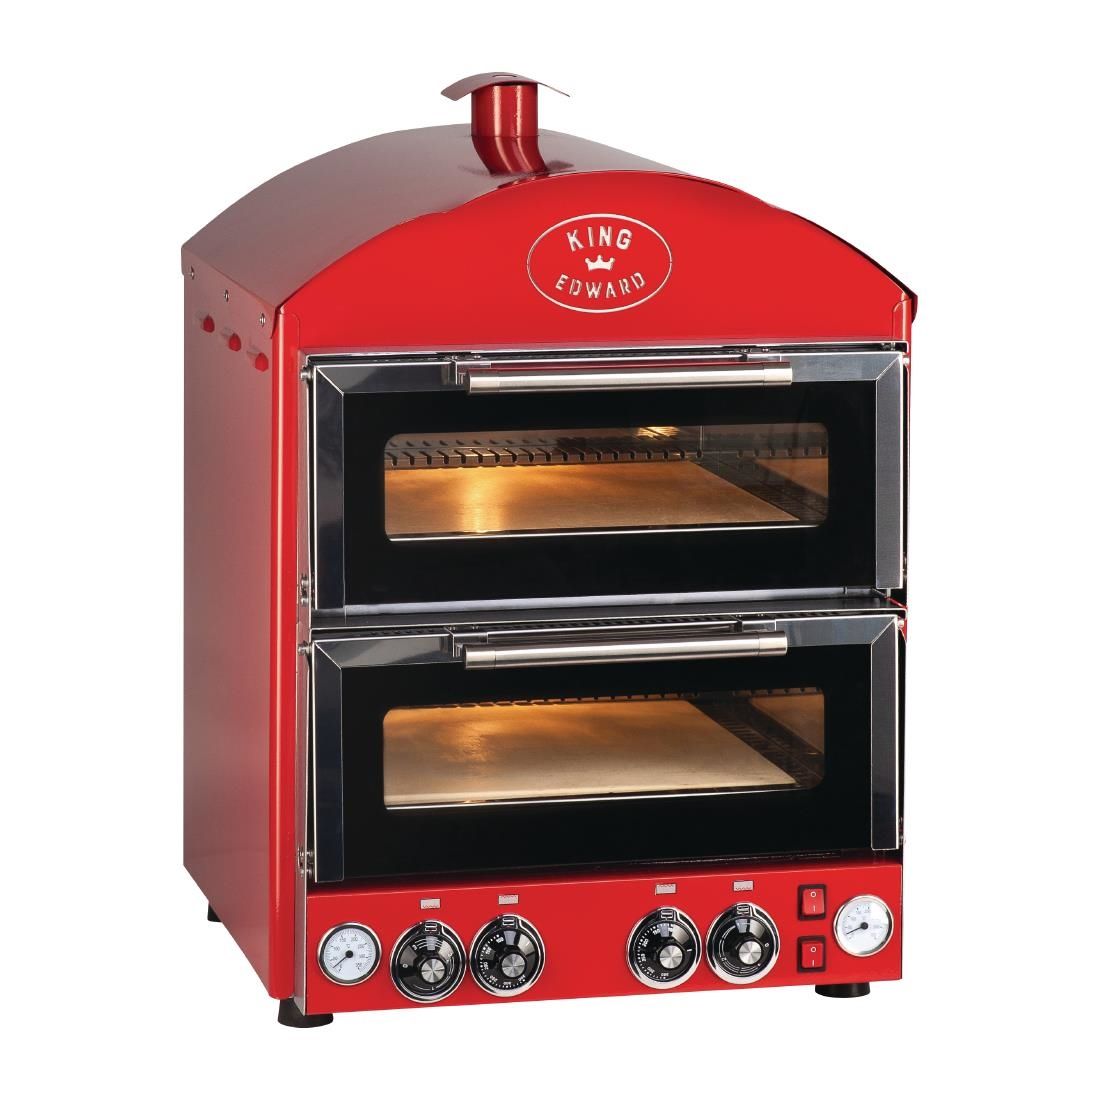 DW476 King Edward Pizza King Oven PK2/RED JD Catering Equipment Solutions Ltd